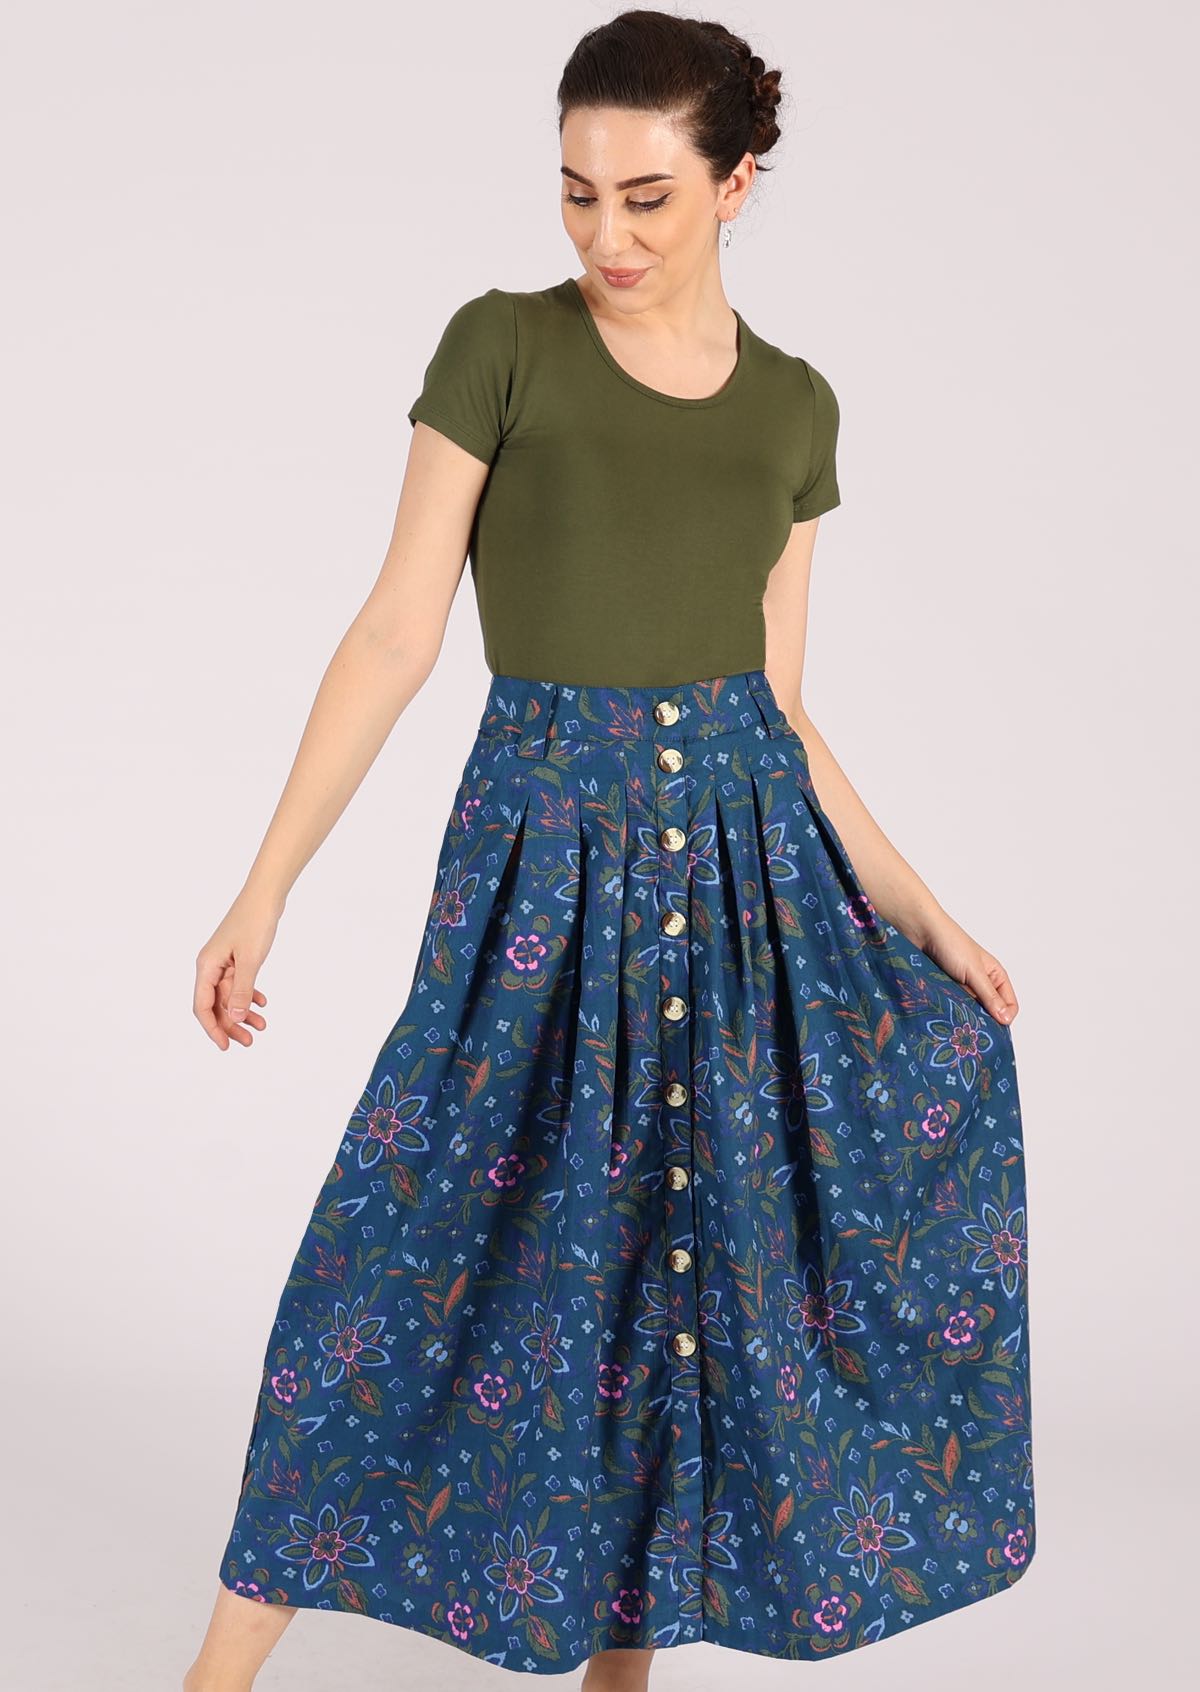 Model wears 100% cotton midi skirt with an orange, green and pink floral pattern on a blue base. 